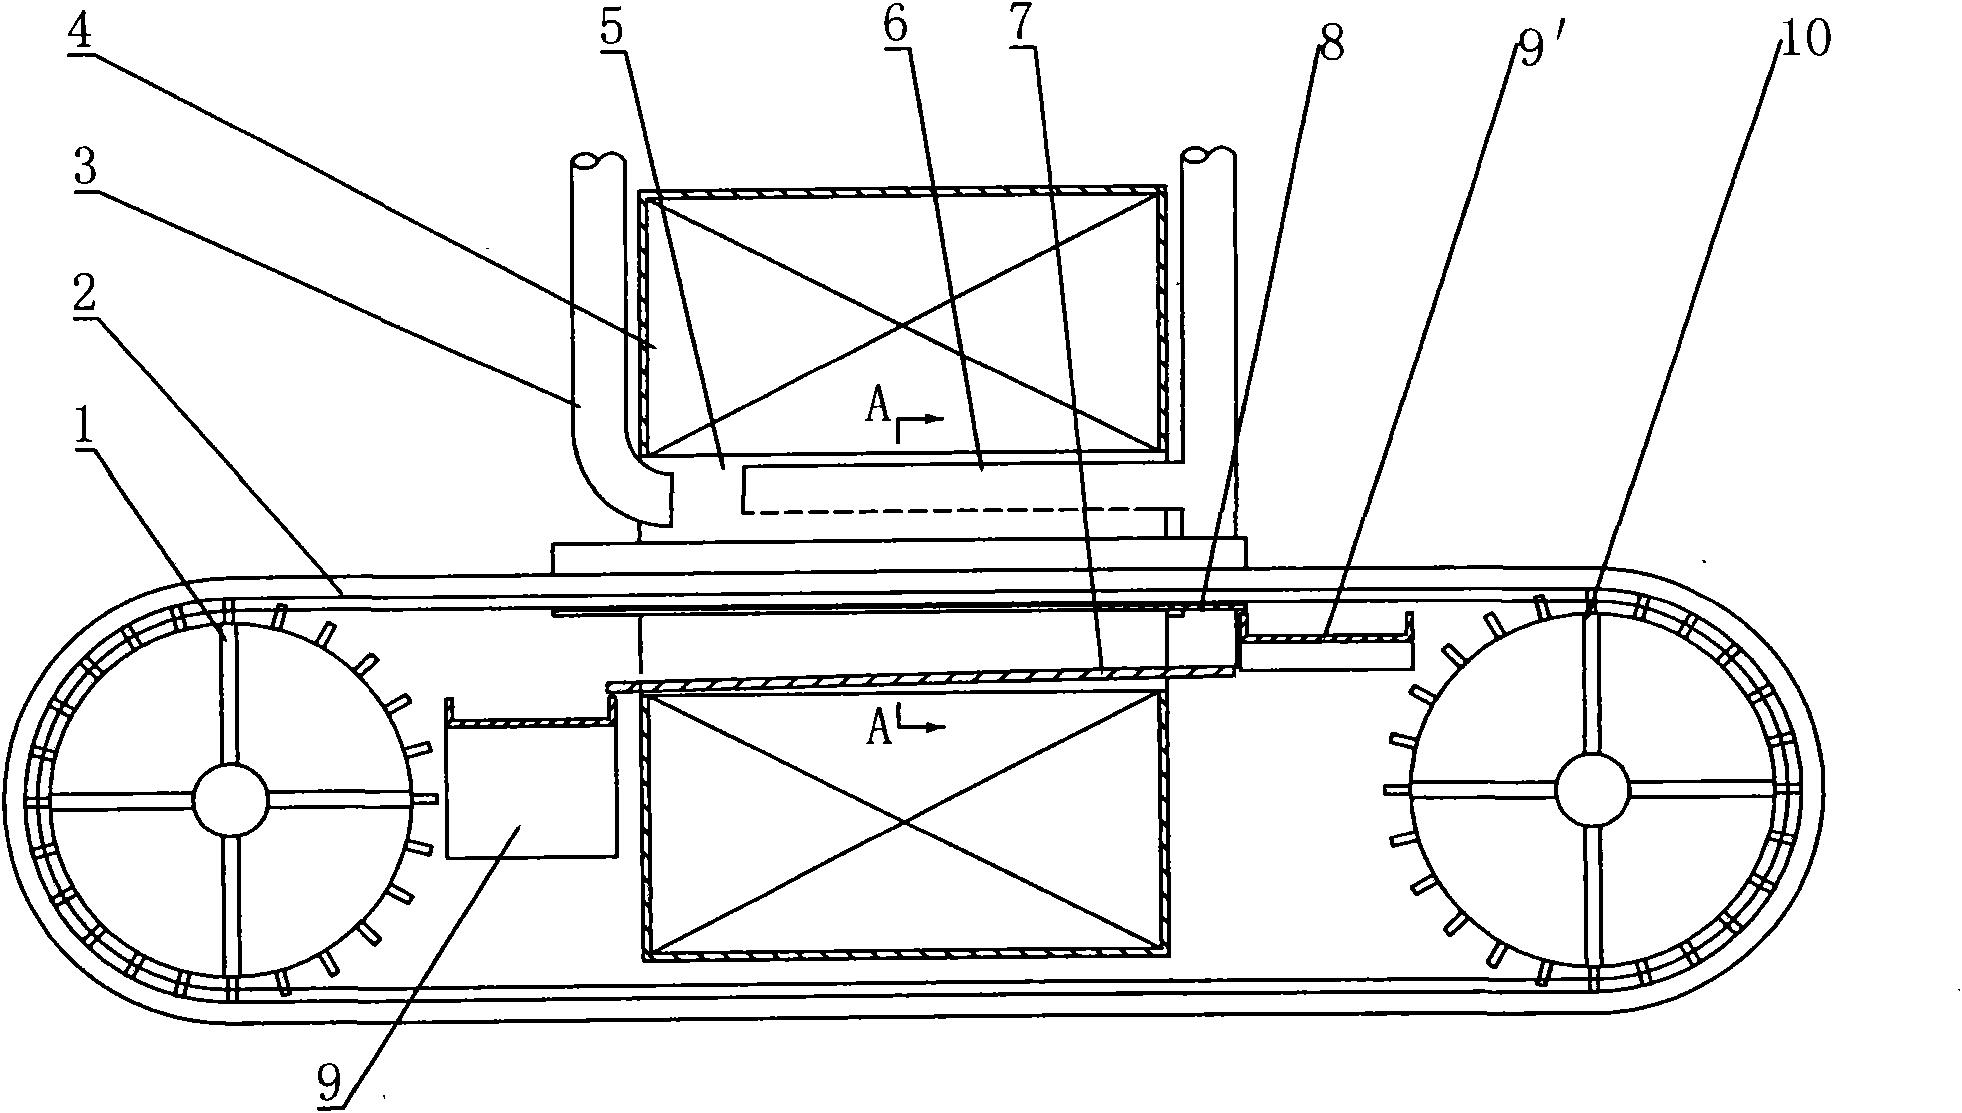 Superconductive magnetic separating device